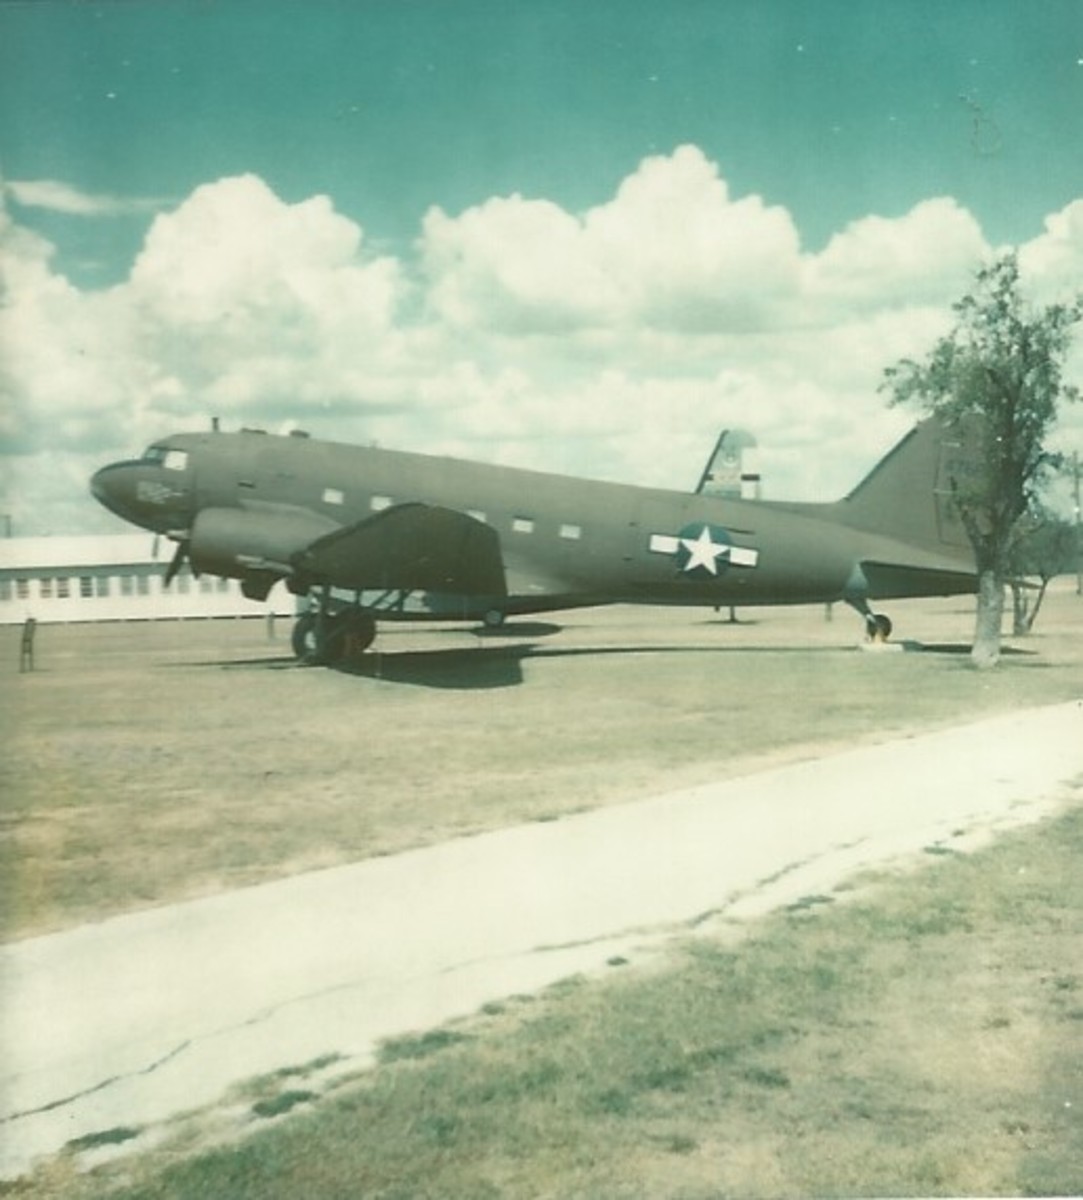 A C-47 on static display, Lackland AFB, TX, 1977.